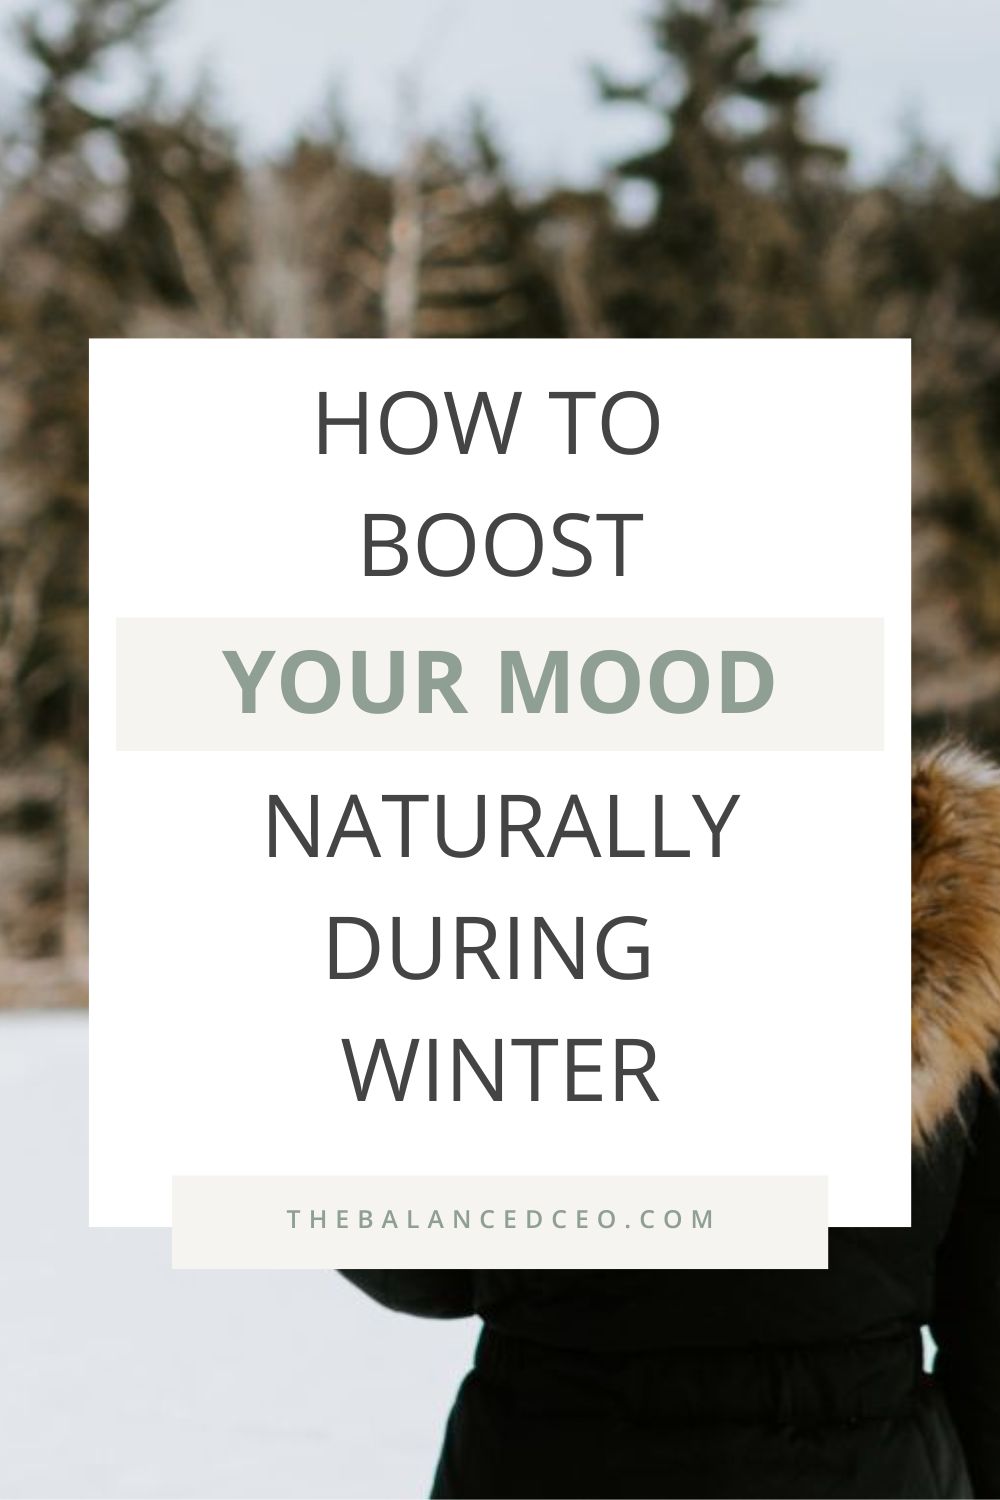 How to Boost Your Mood Naturally During Winter